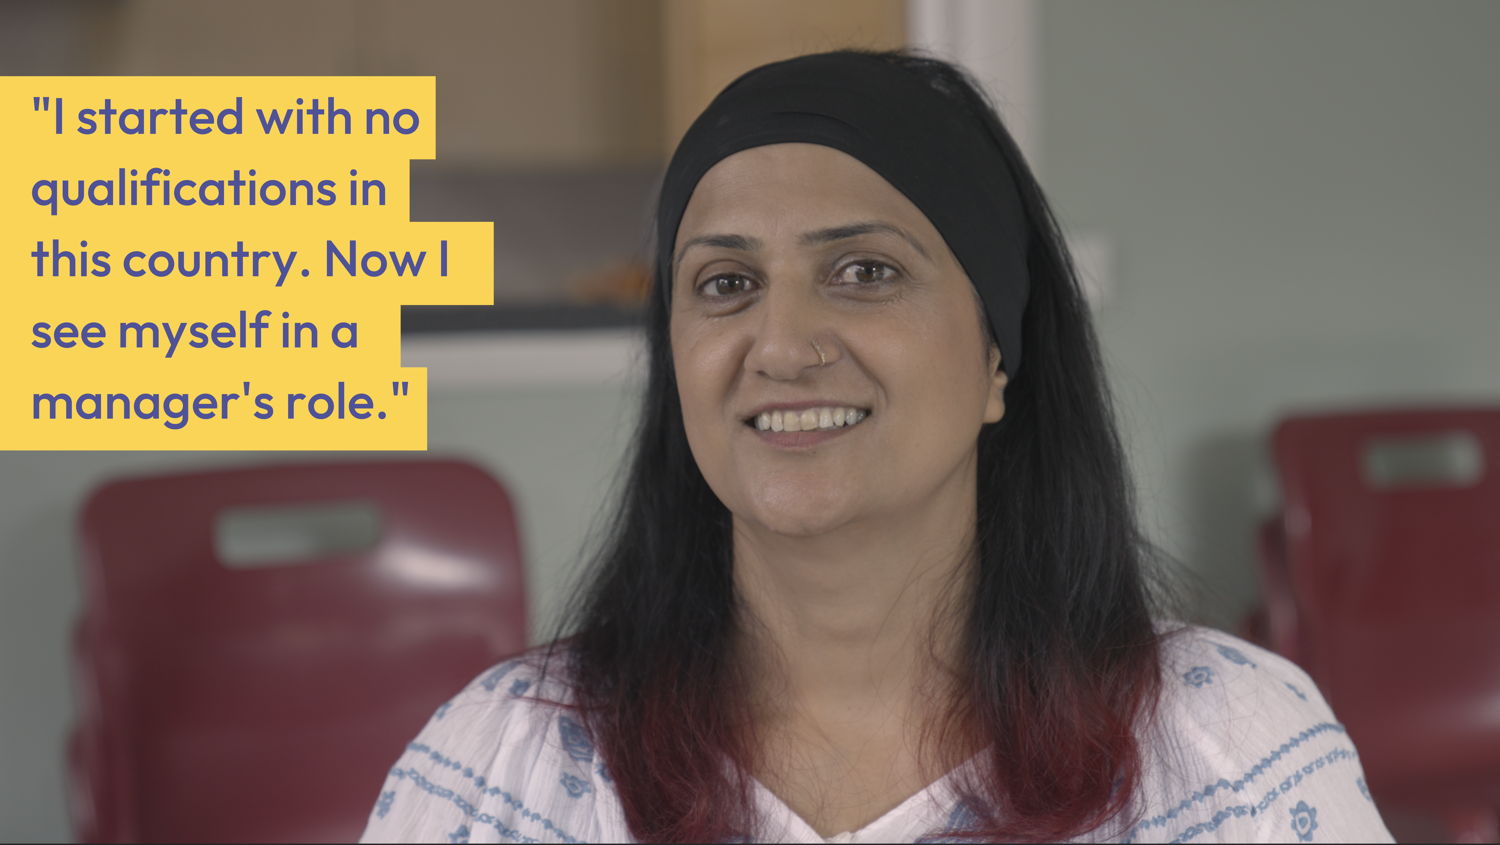 Nisreen began her career with no qualifications in this country, now she’s made her way to a management role but loves that she can continue to work with children and young people every day.